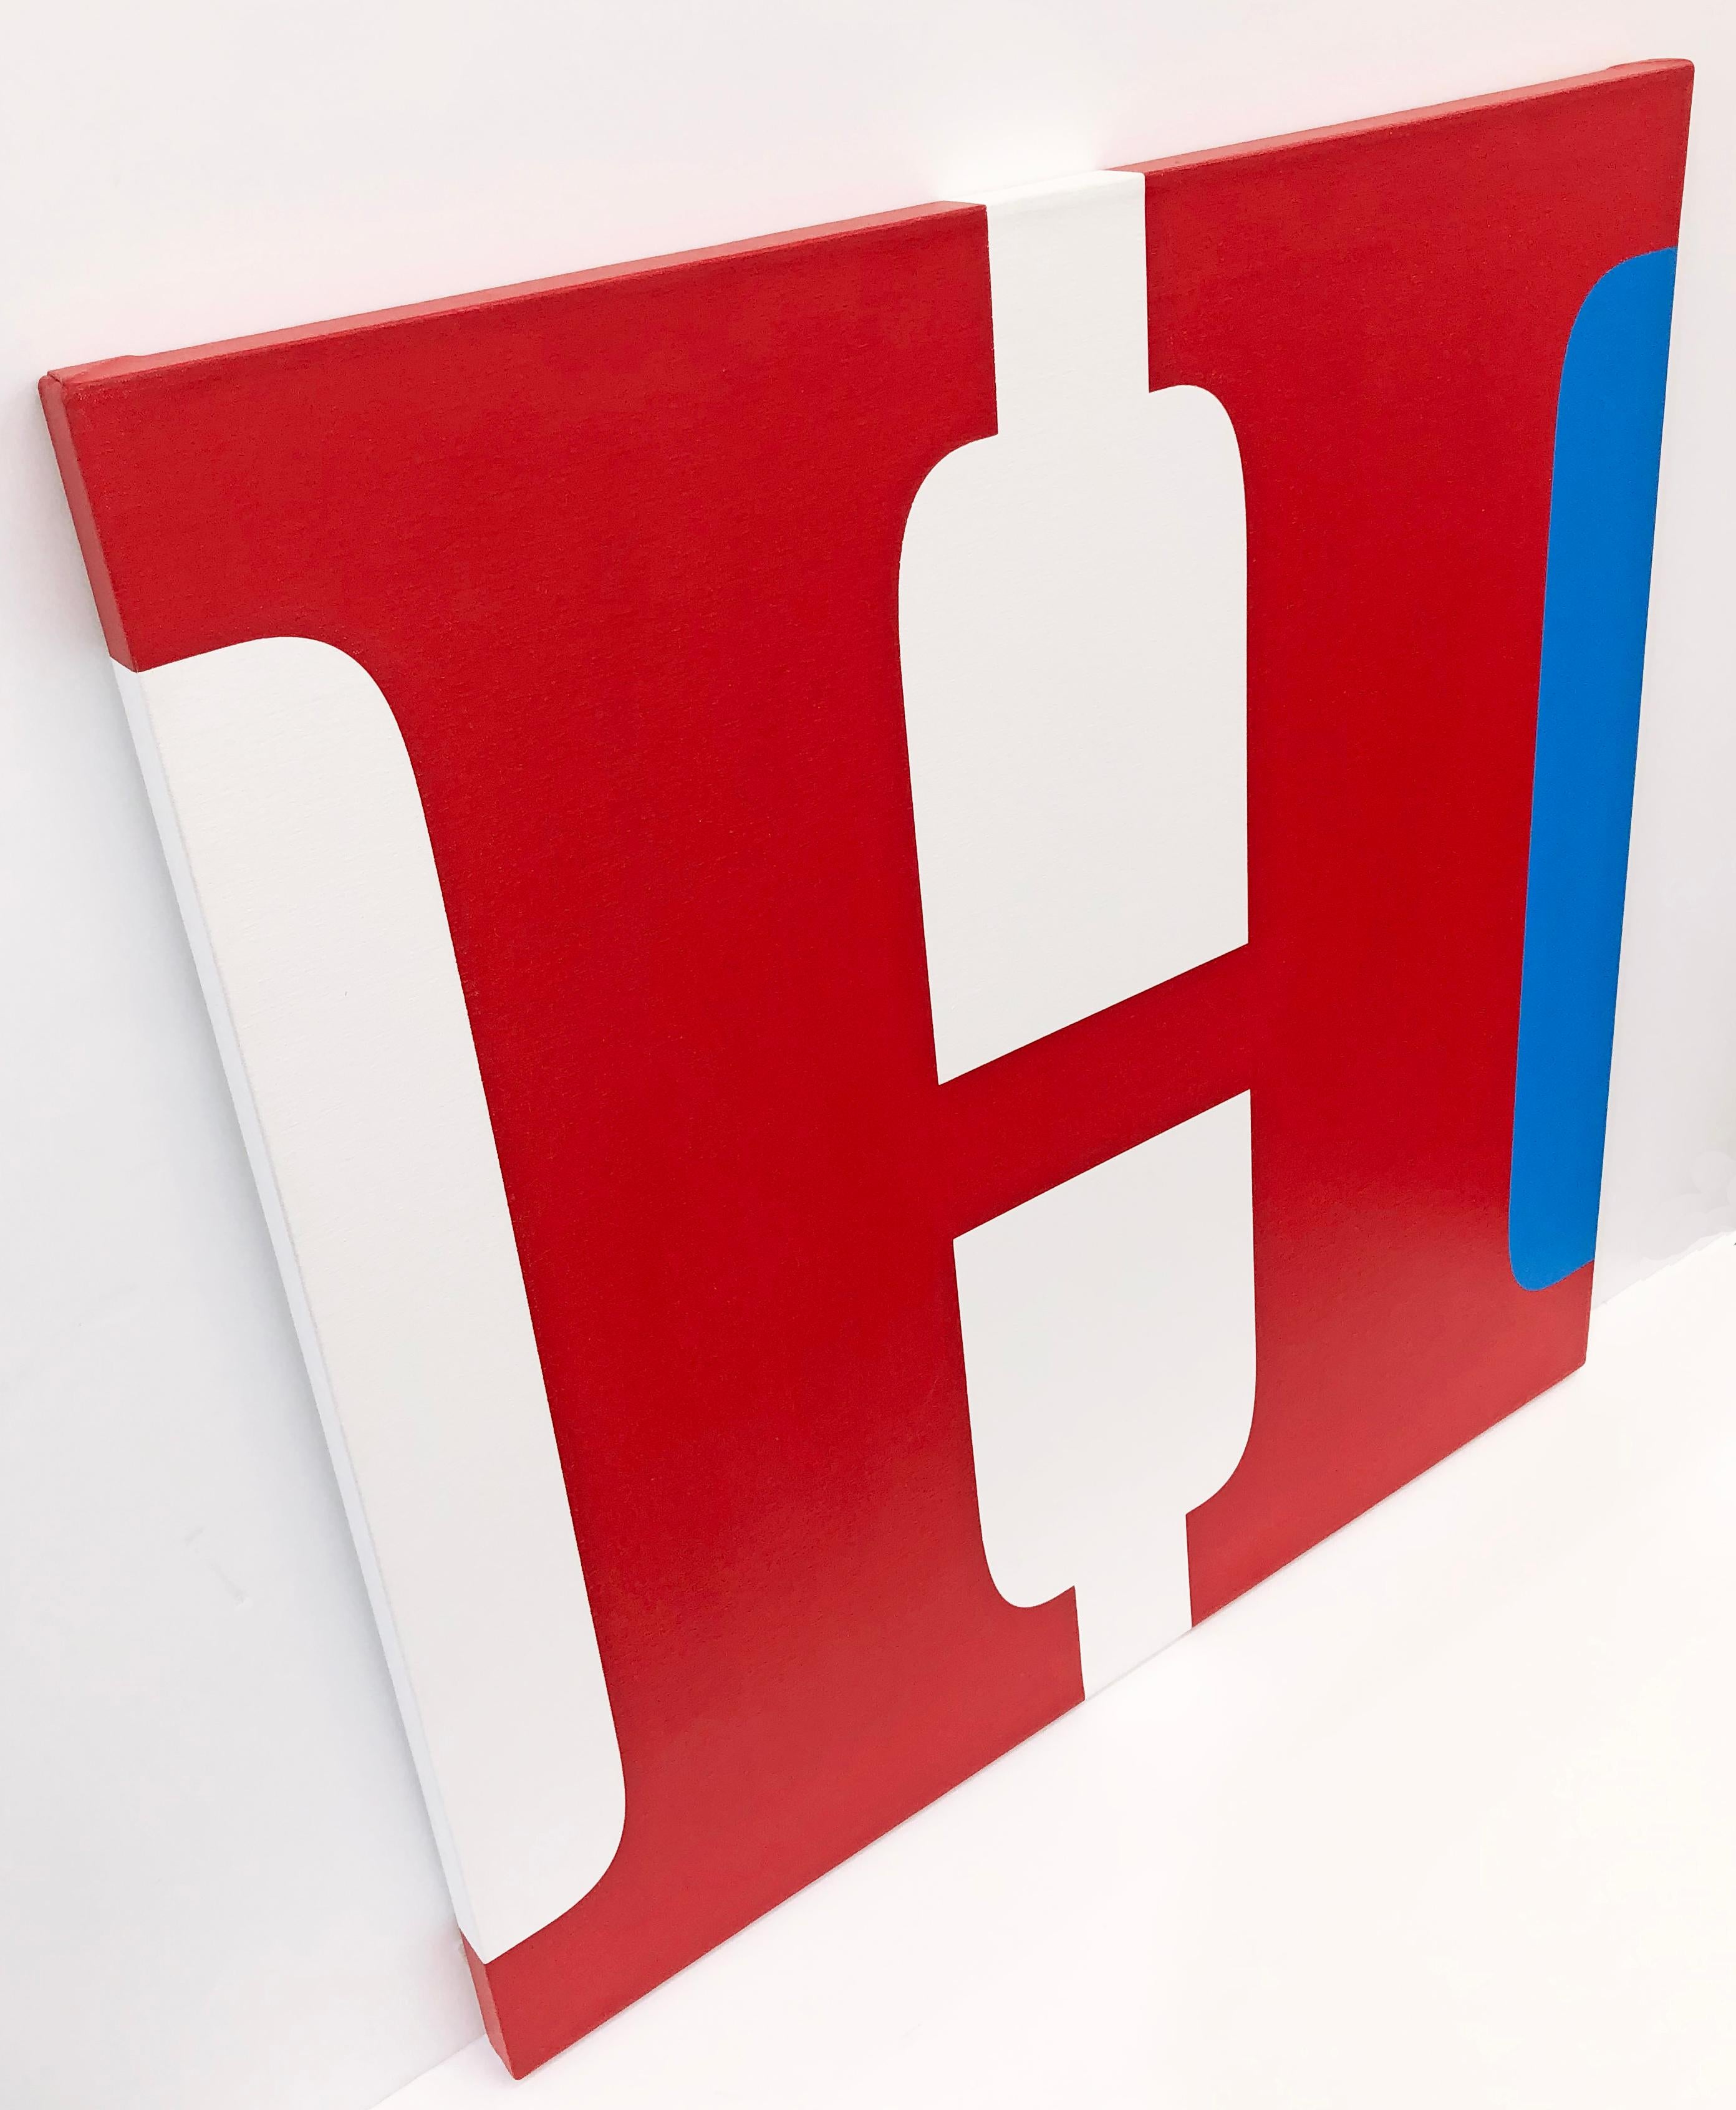 HOPE (R/W/B) LARGE 4 PANEL PAINTING - Print by Robert Indiana